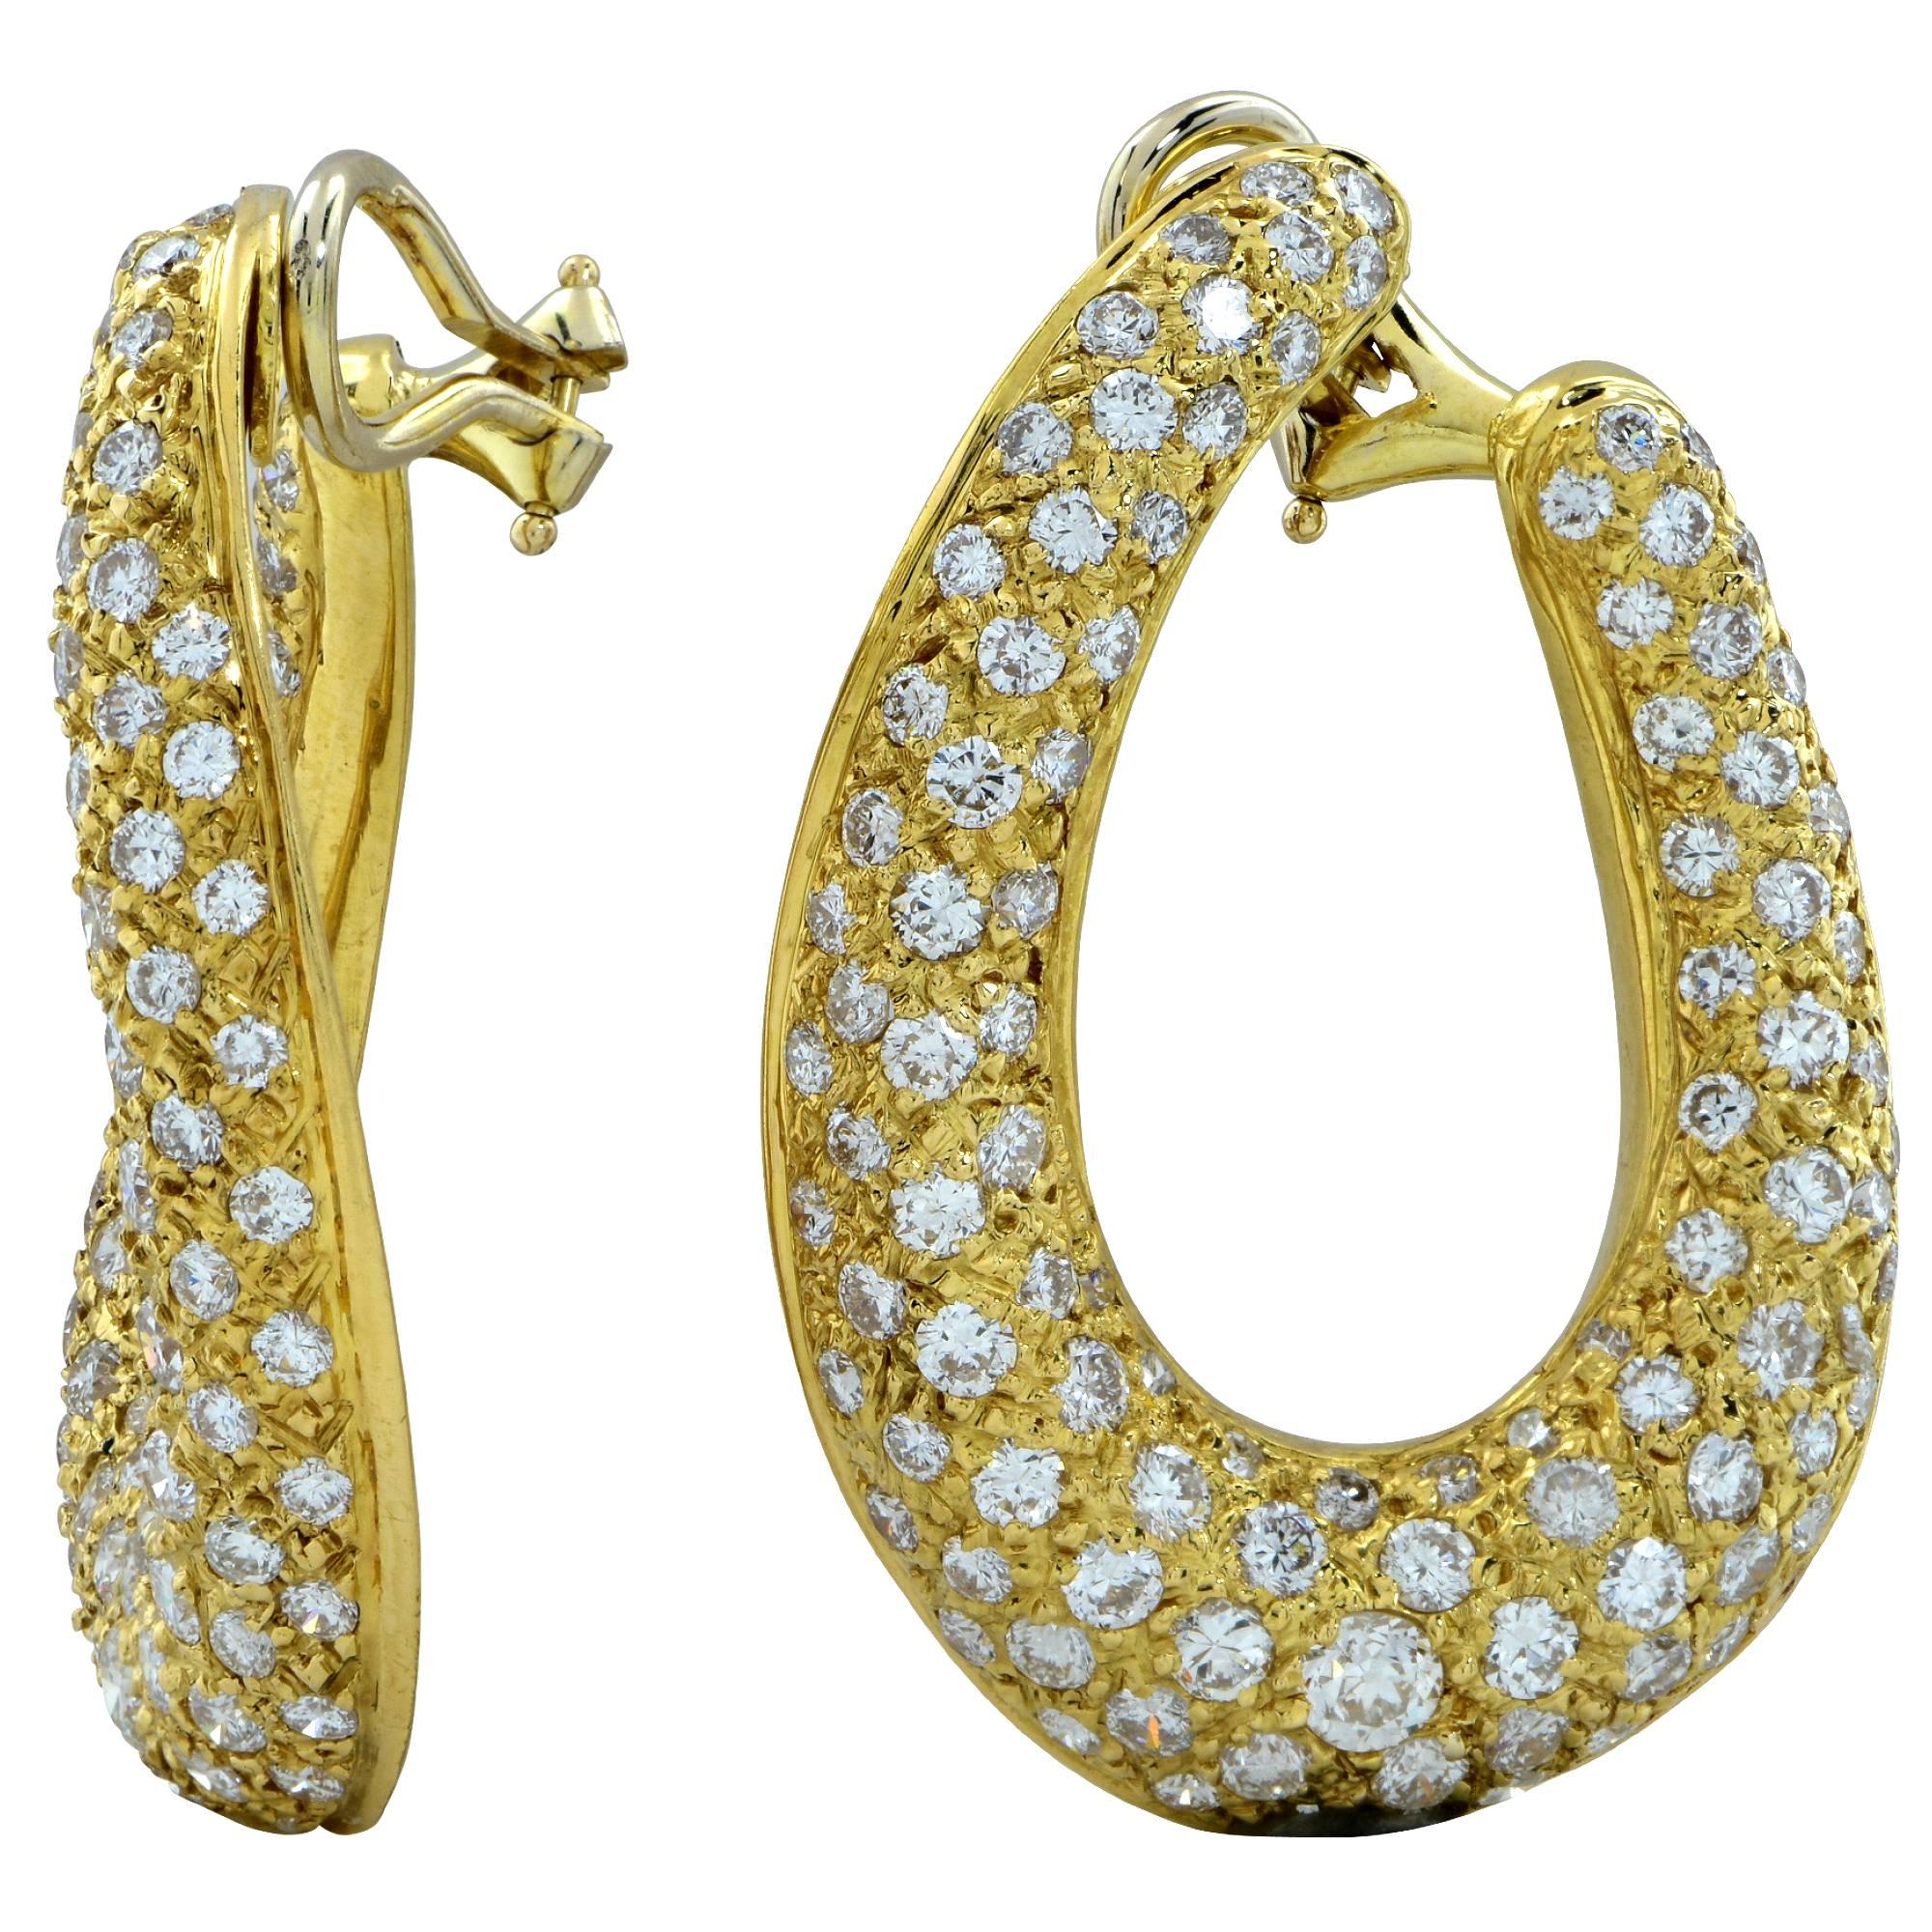 18k yellow gold earrings containing 204 round brilliant cut diamonds weighing approximately 8cts F-G color and VS-SI clarity.

These gorgeous earrings measure 1.50 inches in height by 1 inch in width.
It is stamped and/or tested as 18k gold.
The